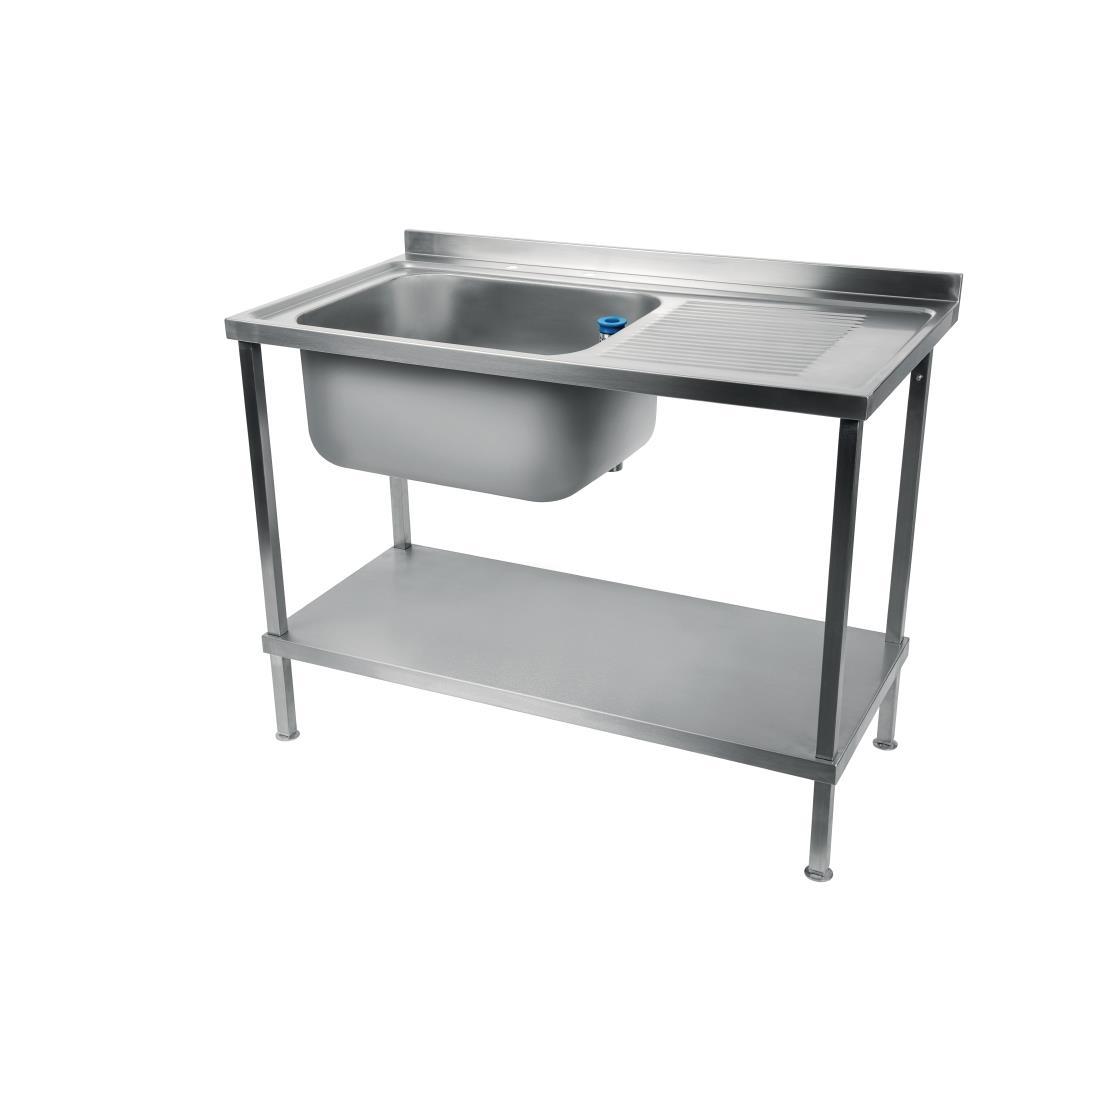 Holmes Fully Assembled Stainless Steel Sink Right Hand Drainer 1200mm - DR388  - 3